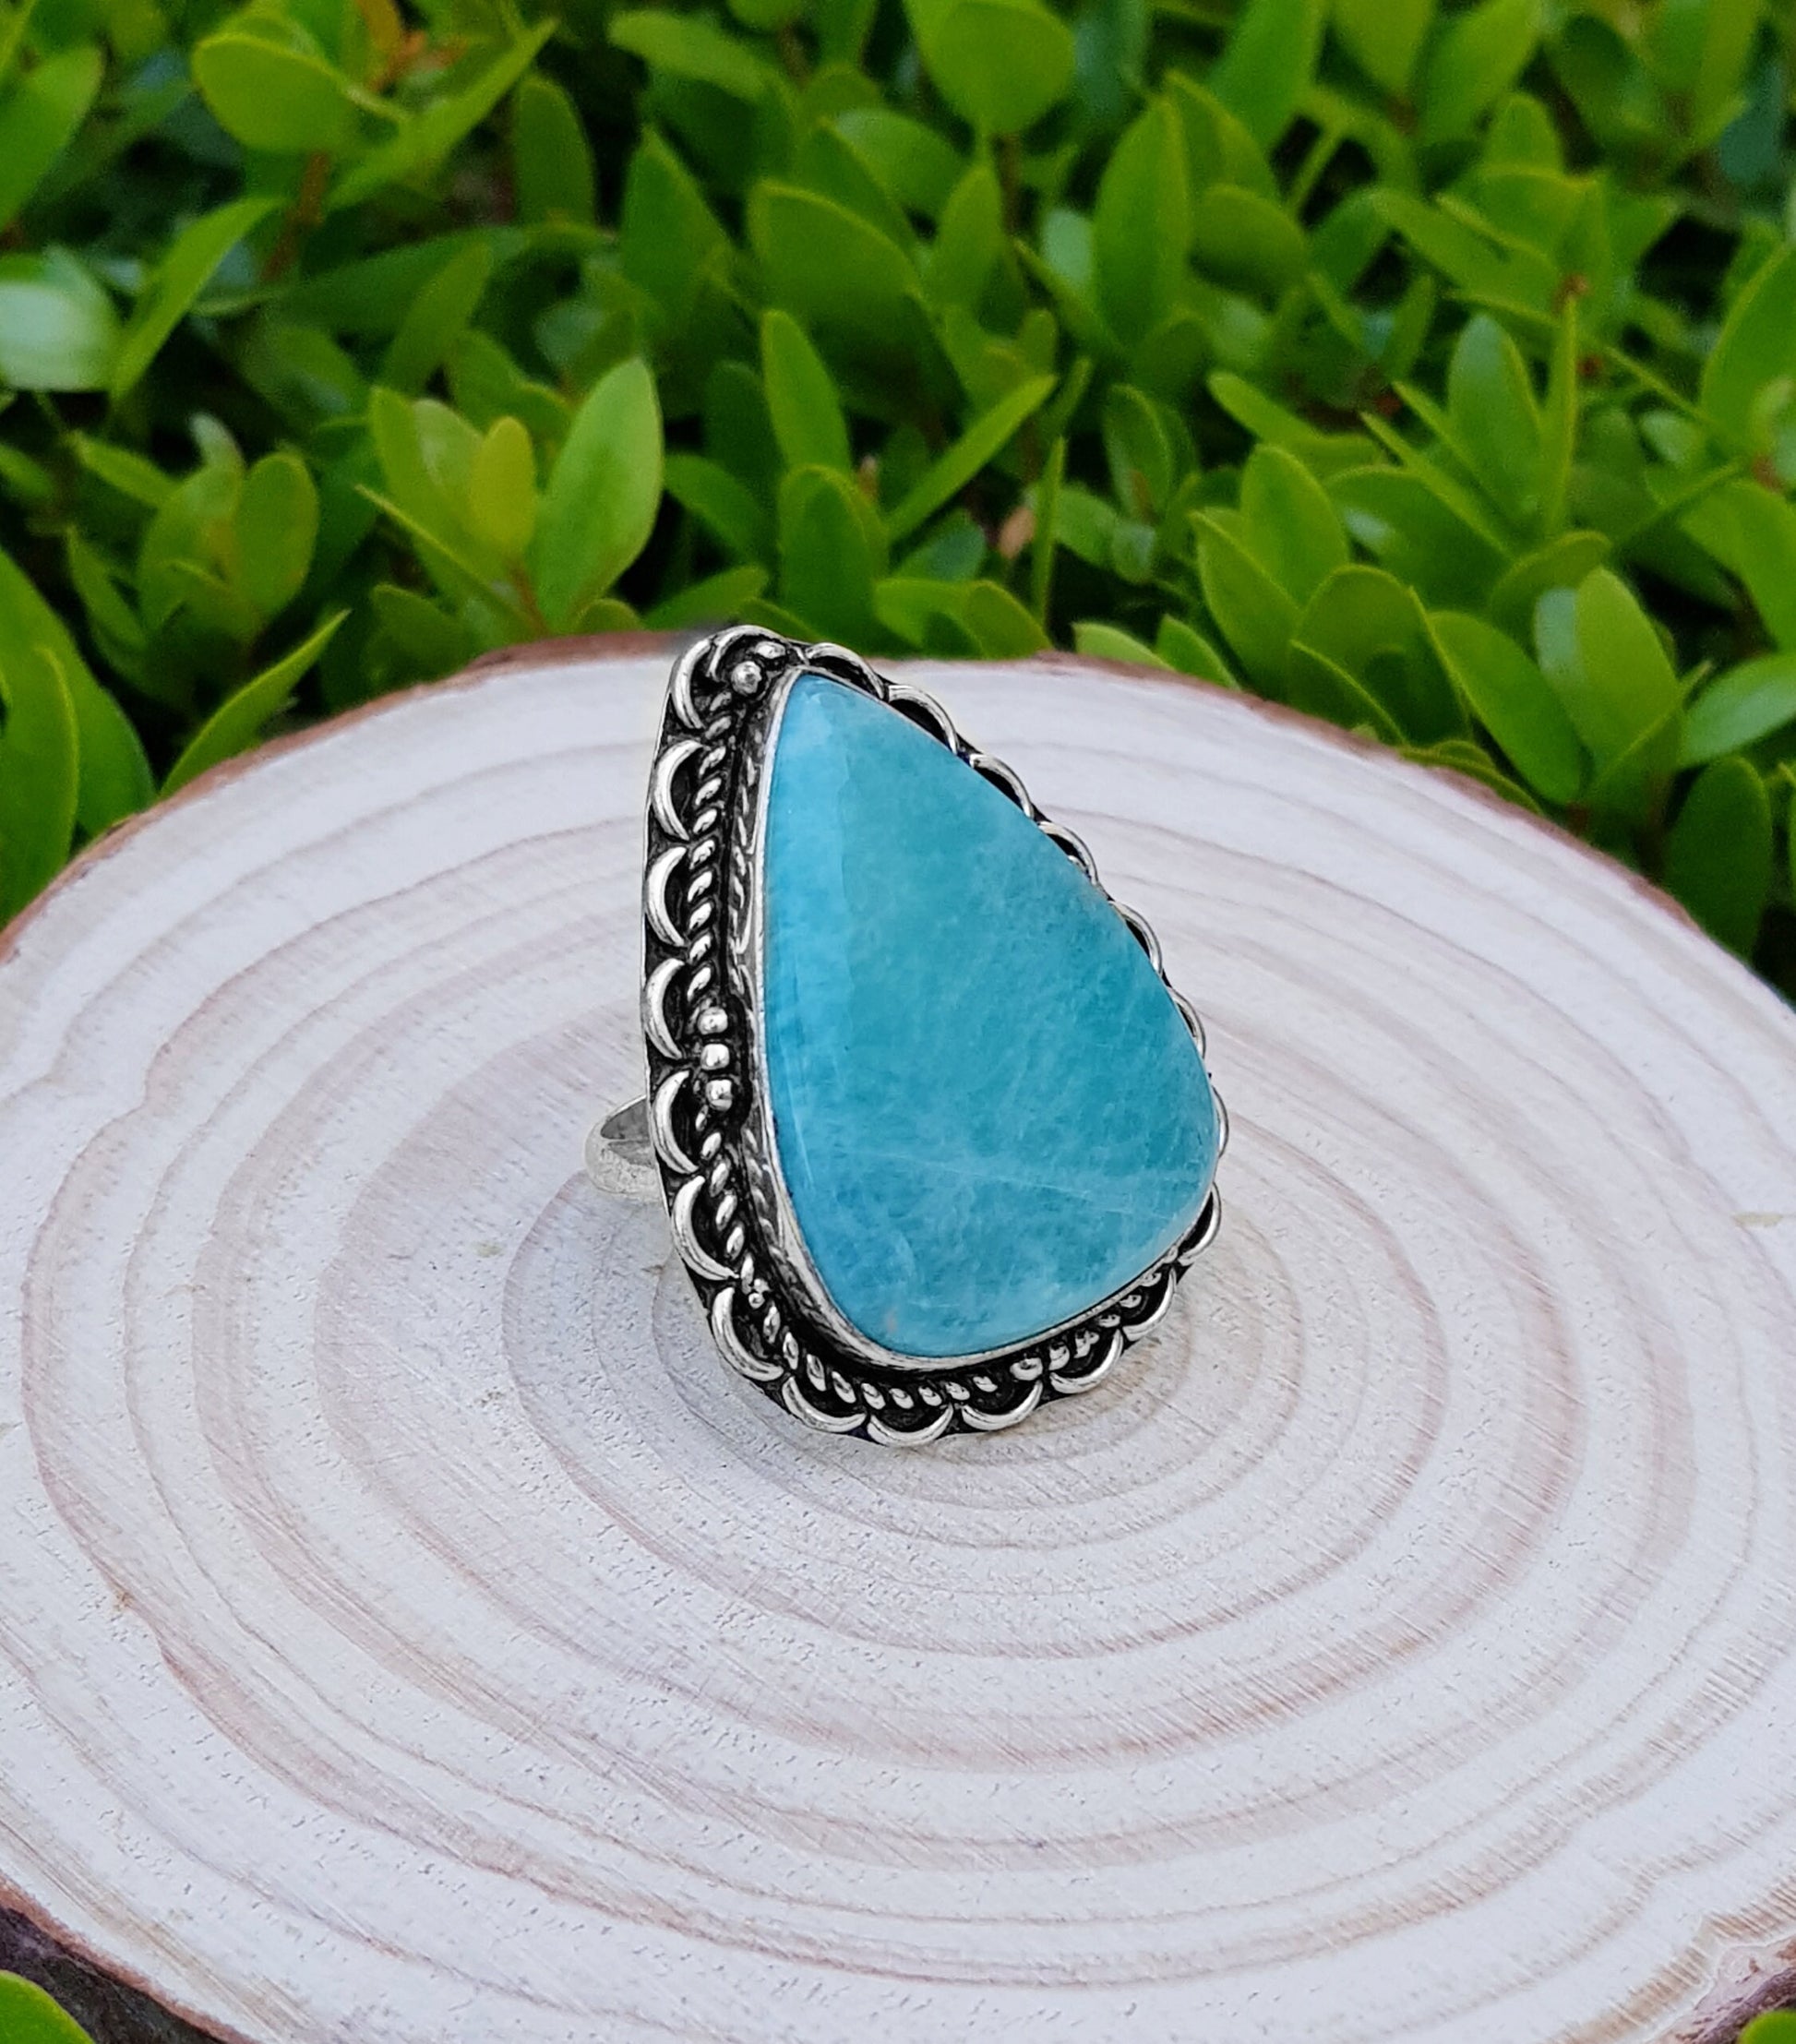 Amazonite Statement Ring Sterling Silver Gemstone Ring Size US 7 3/4 Boho Ring Unique Gift GypsyJewelry Ethnic Ring One Of A Kind Jewelry